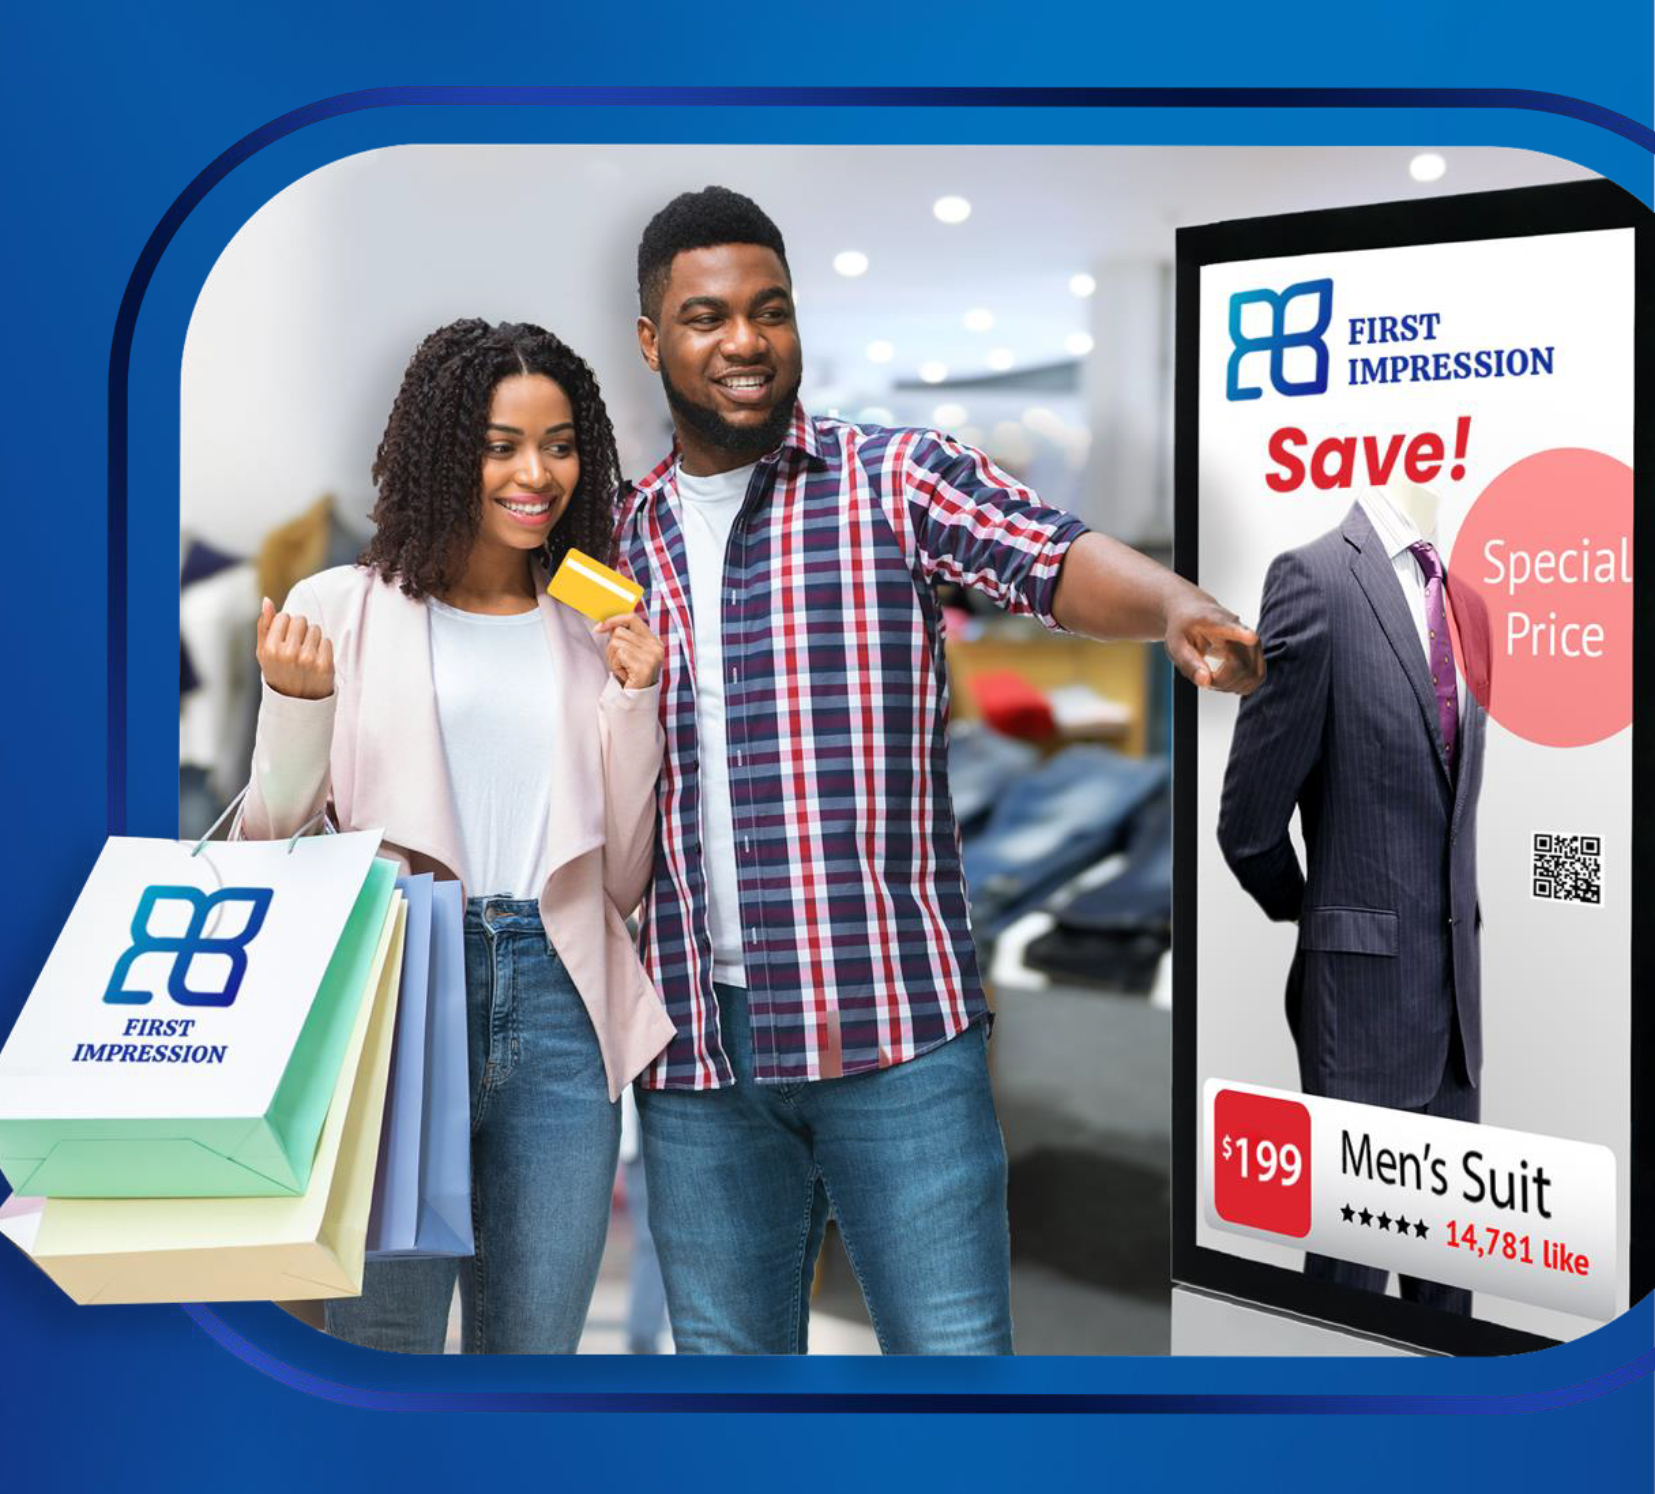 FTx Digital Signage is the fast, effective way to make an impact in your retail store, bar, restaurant, venue, pop-up, and more. Improve each and every customer visit by displaying special offers, BOGOs, popular items, and new products.